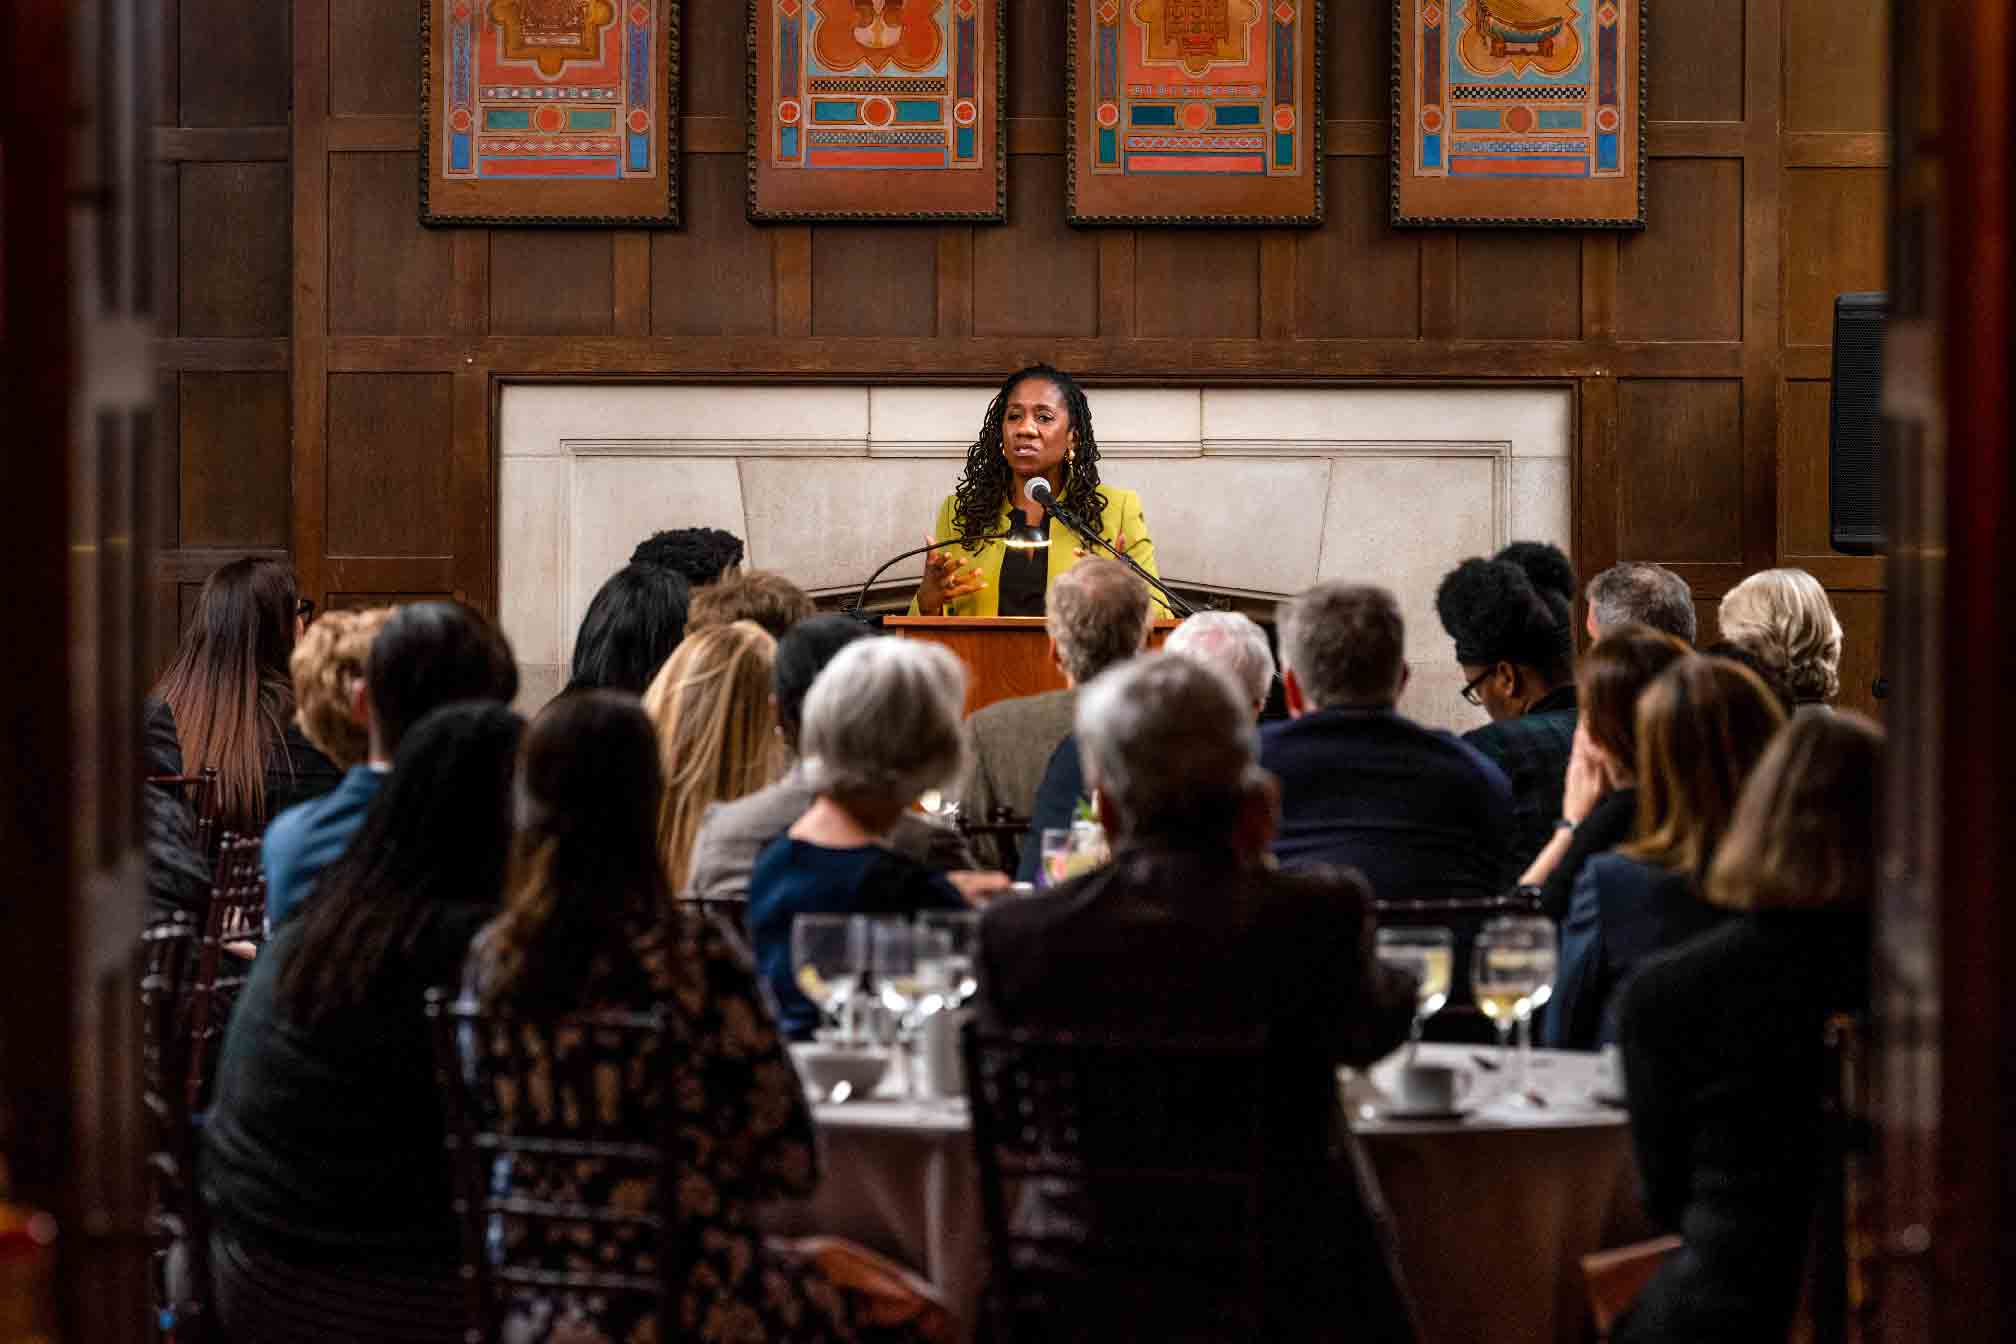 A person with long dark hair, yellow jacket, and a black shirt, Sherrilyn Ifill, stands behind a podium, speaking to a seated audience at a Vassar event.